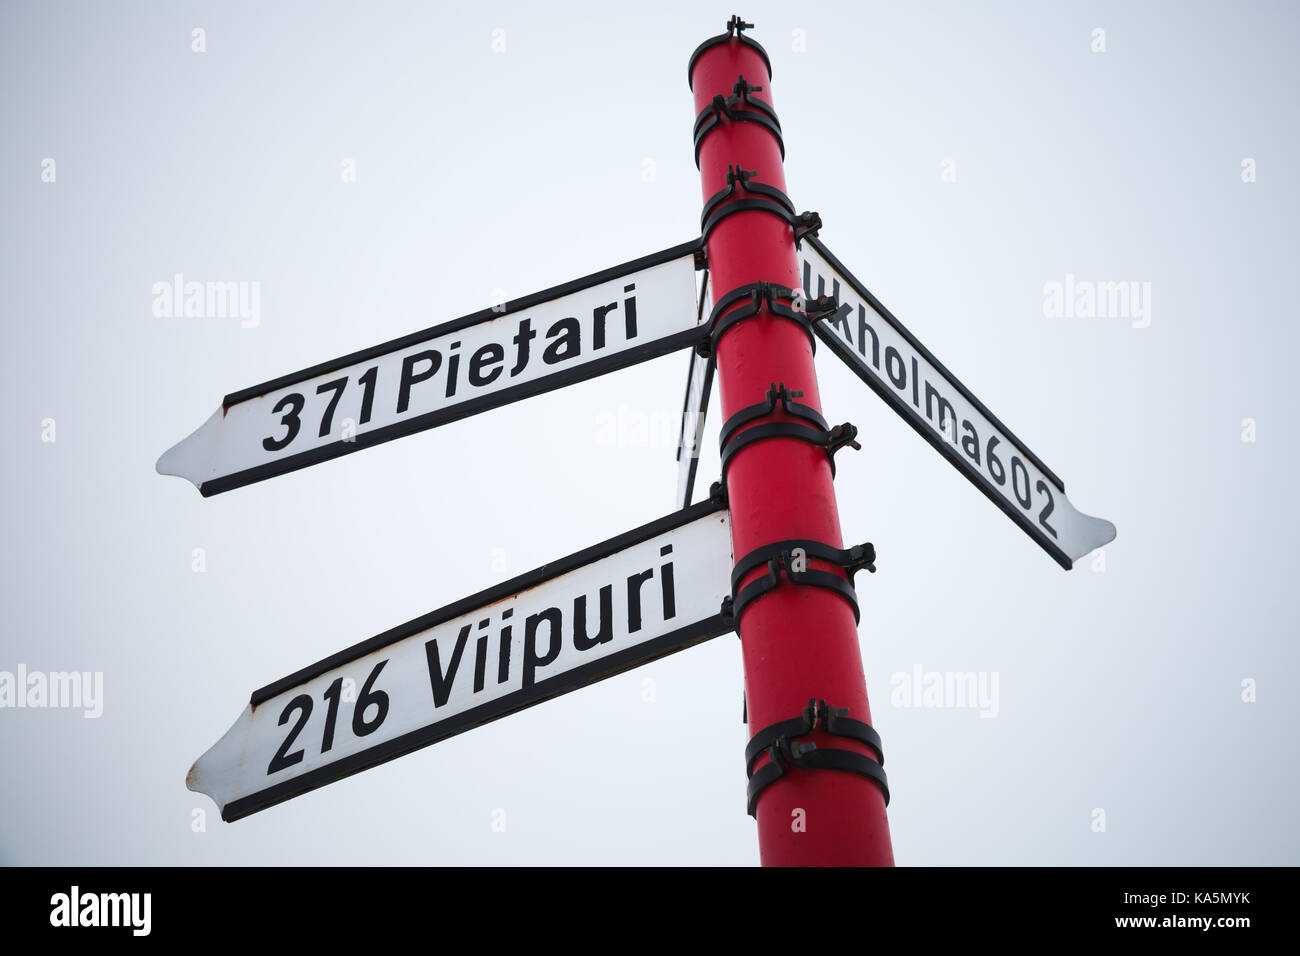 Red signpost, directional signs with distances to cities. Savonlinna, Finland Stock Photo